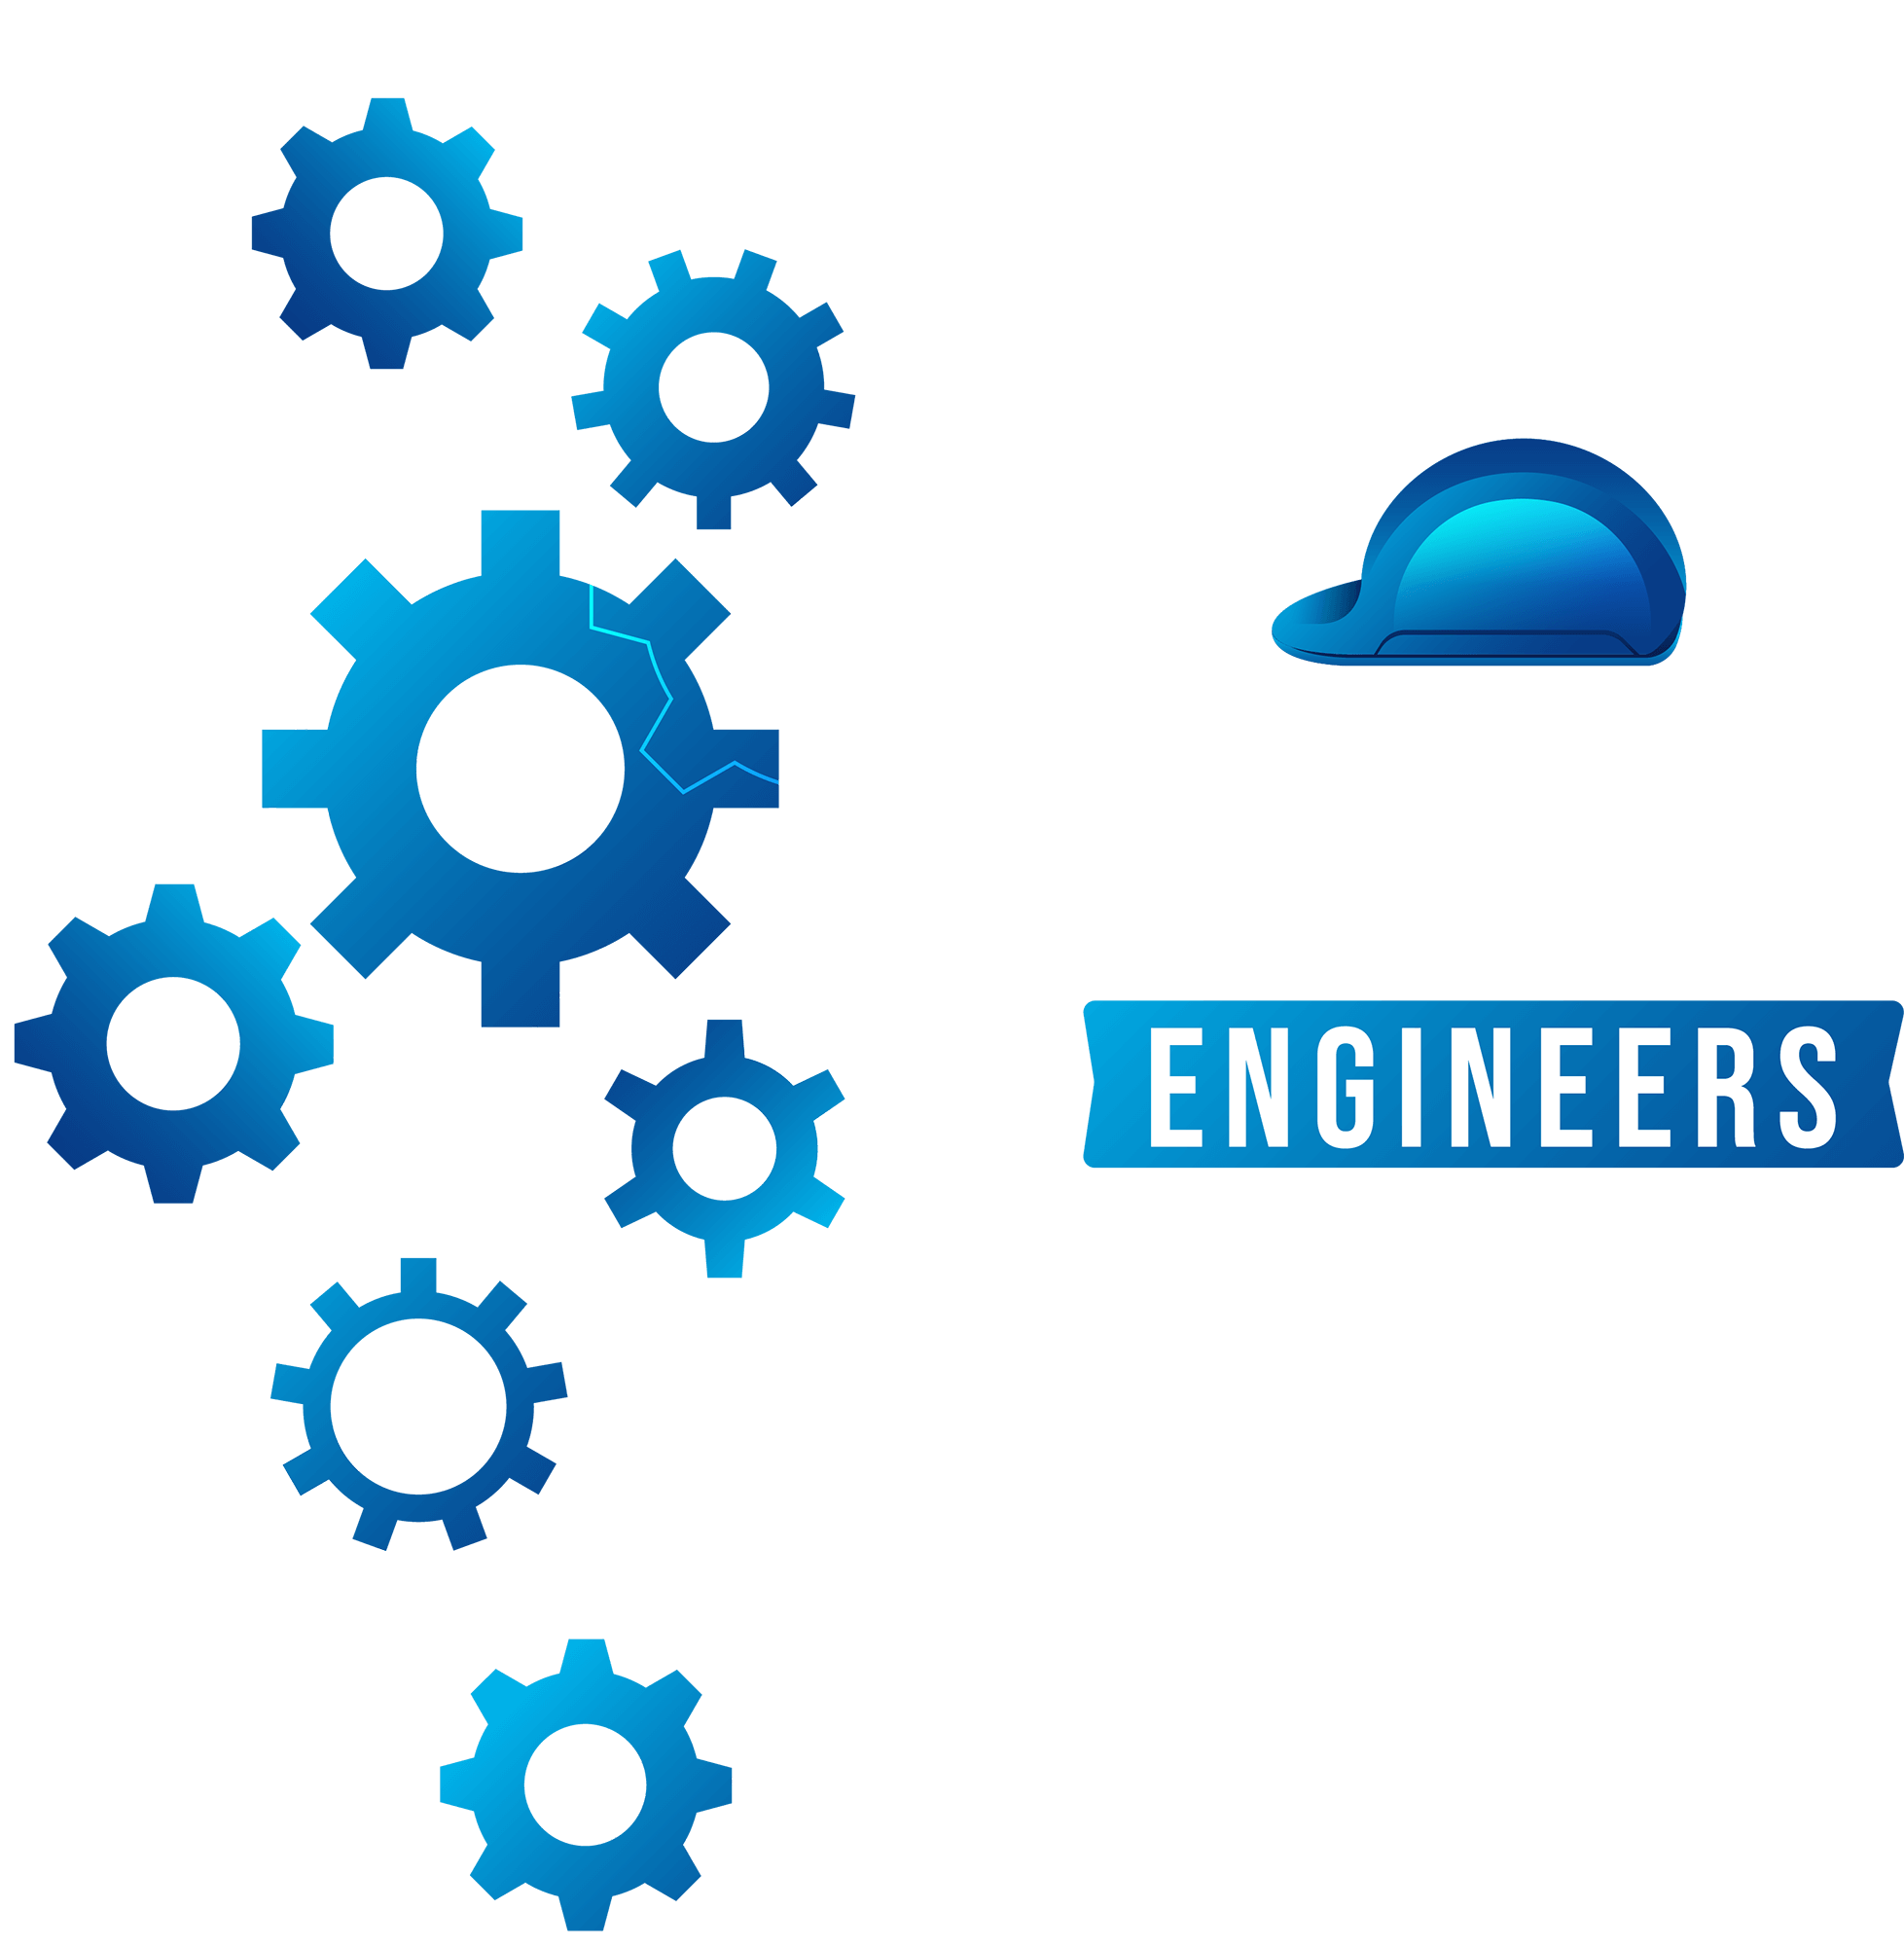 Engineers Day 2021 Happy Engineer Day PNG Image Download